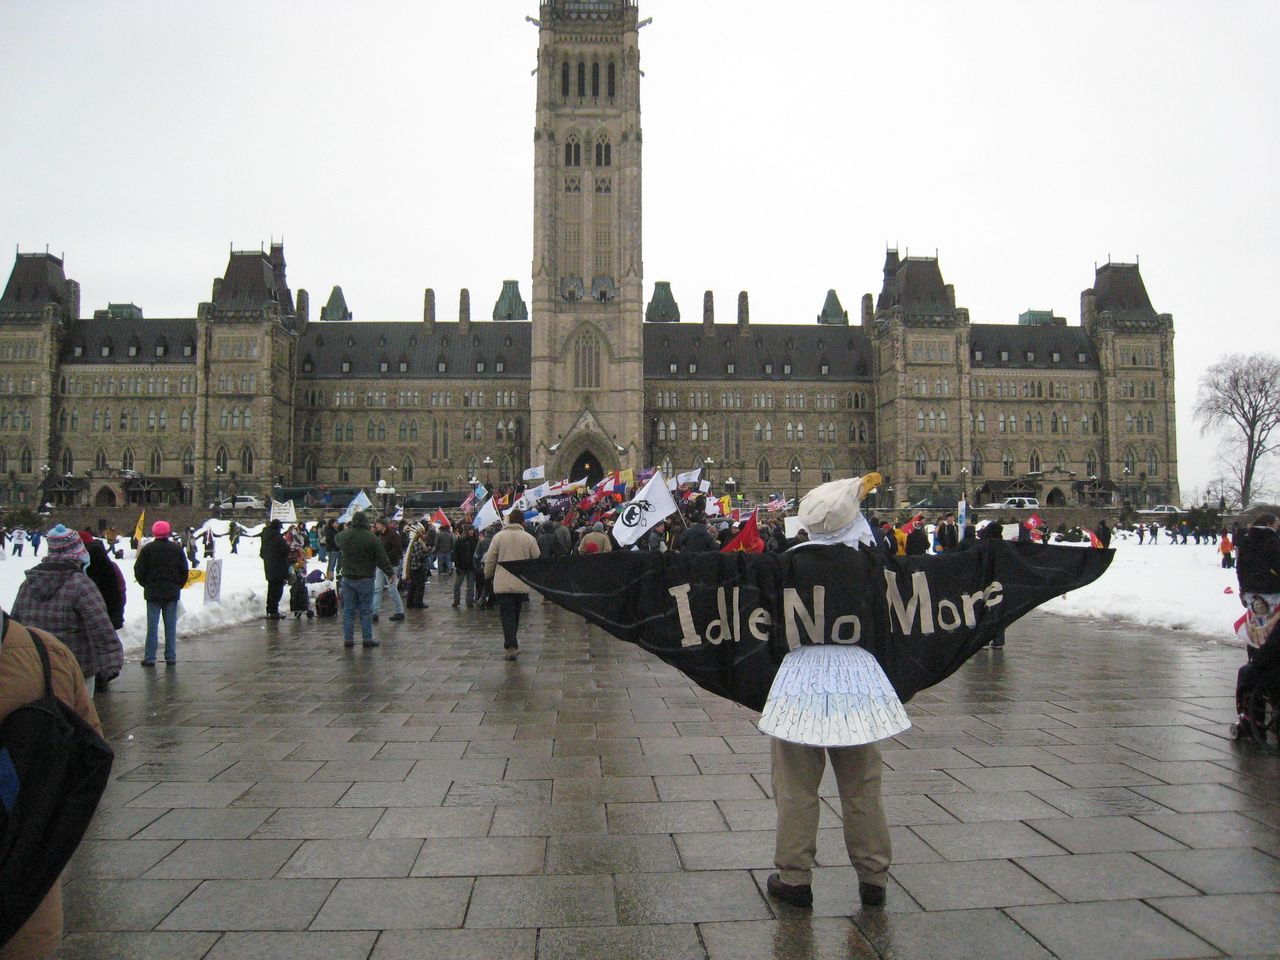 The Idle No More Movement holds a protest on Parliament Hill.